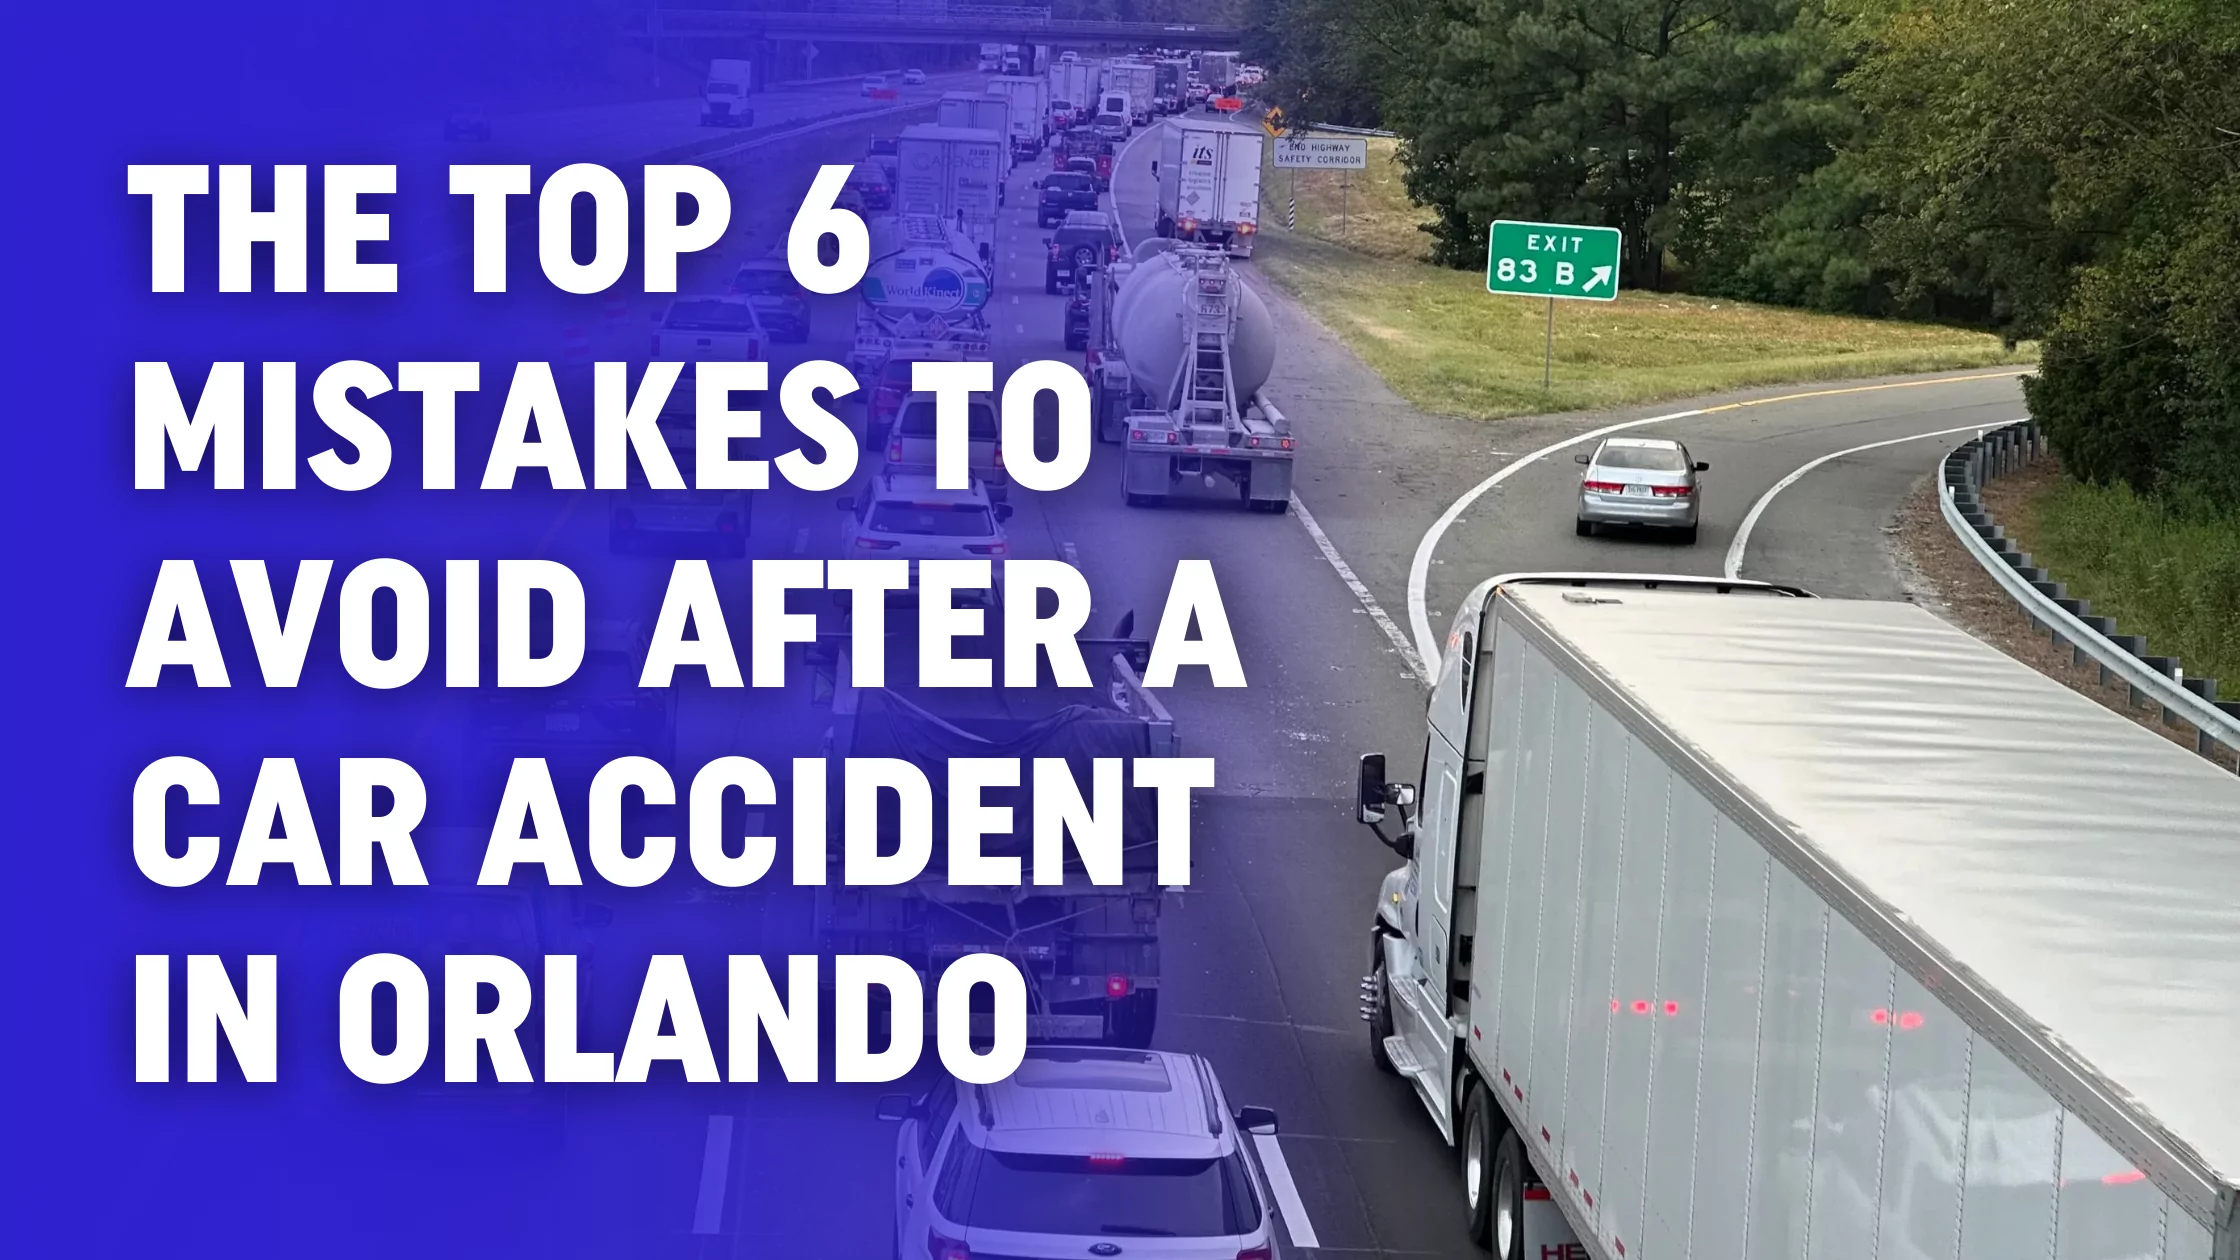 The Top 6 Mistakes to Avoid After a Car Accident in Orlando